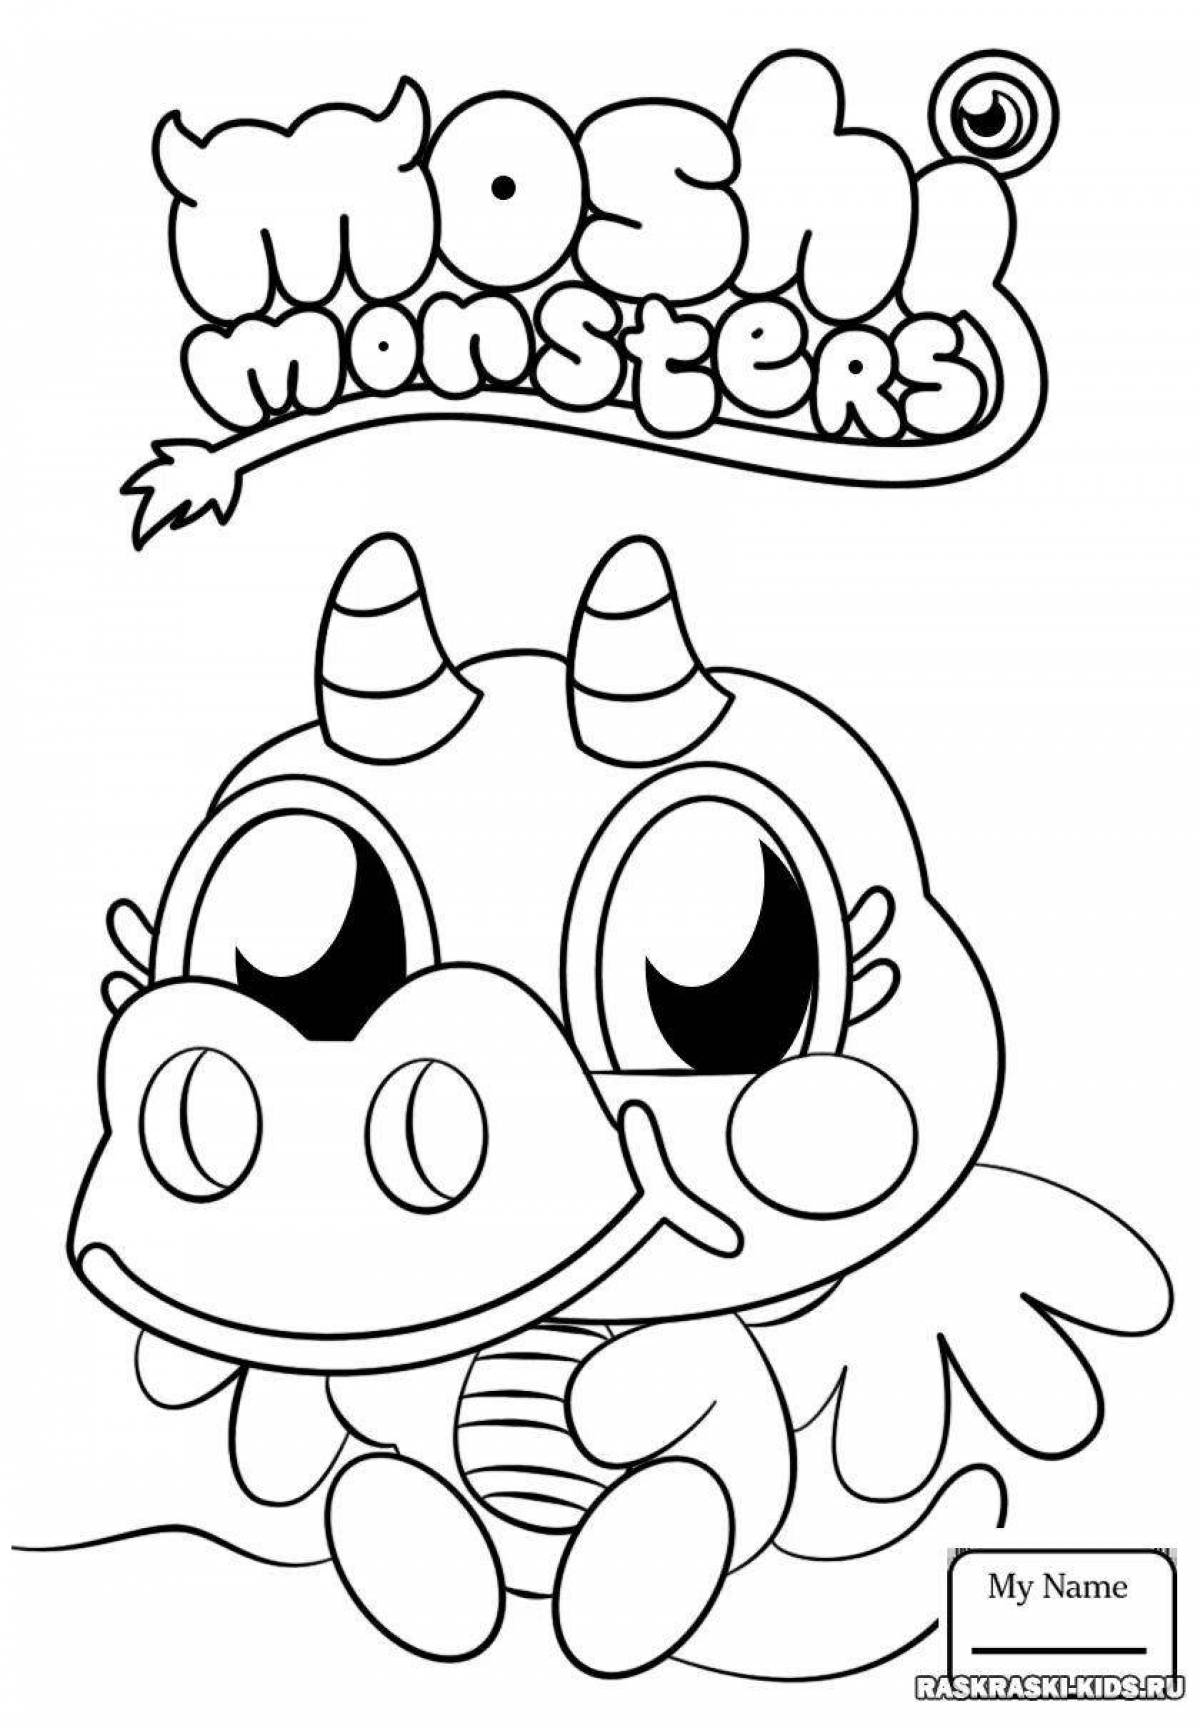 Colorful monsters coloring pages for kids